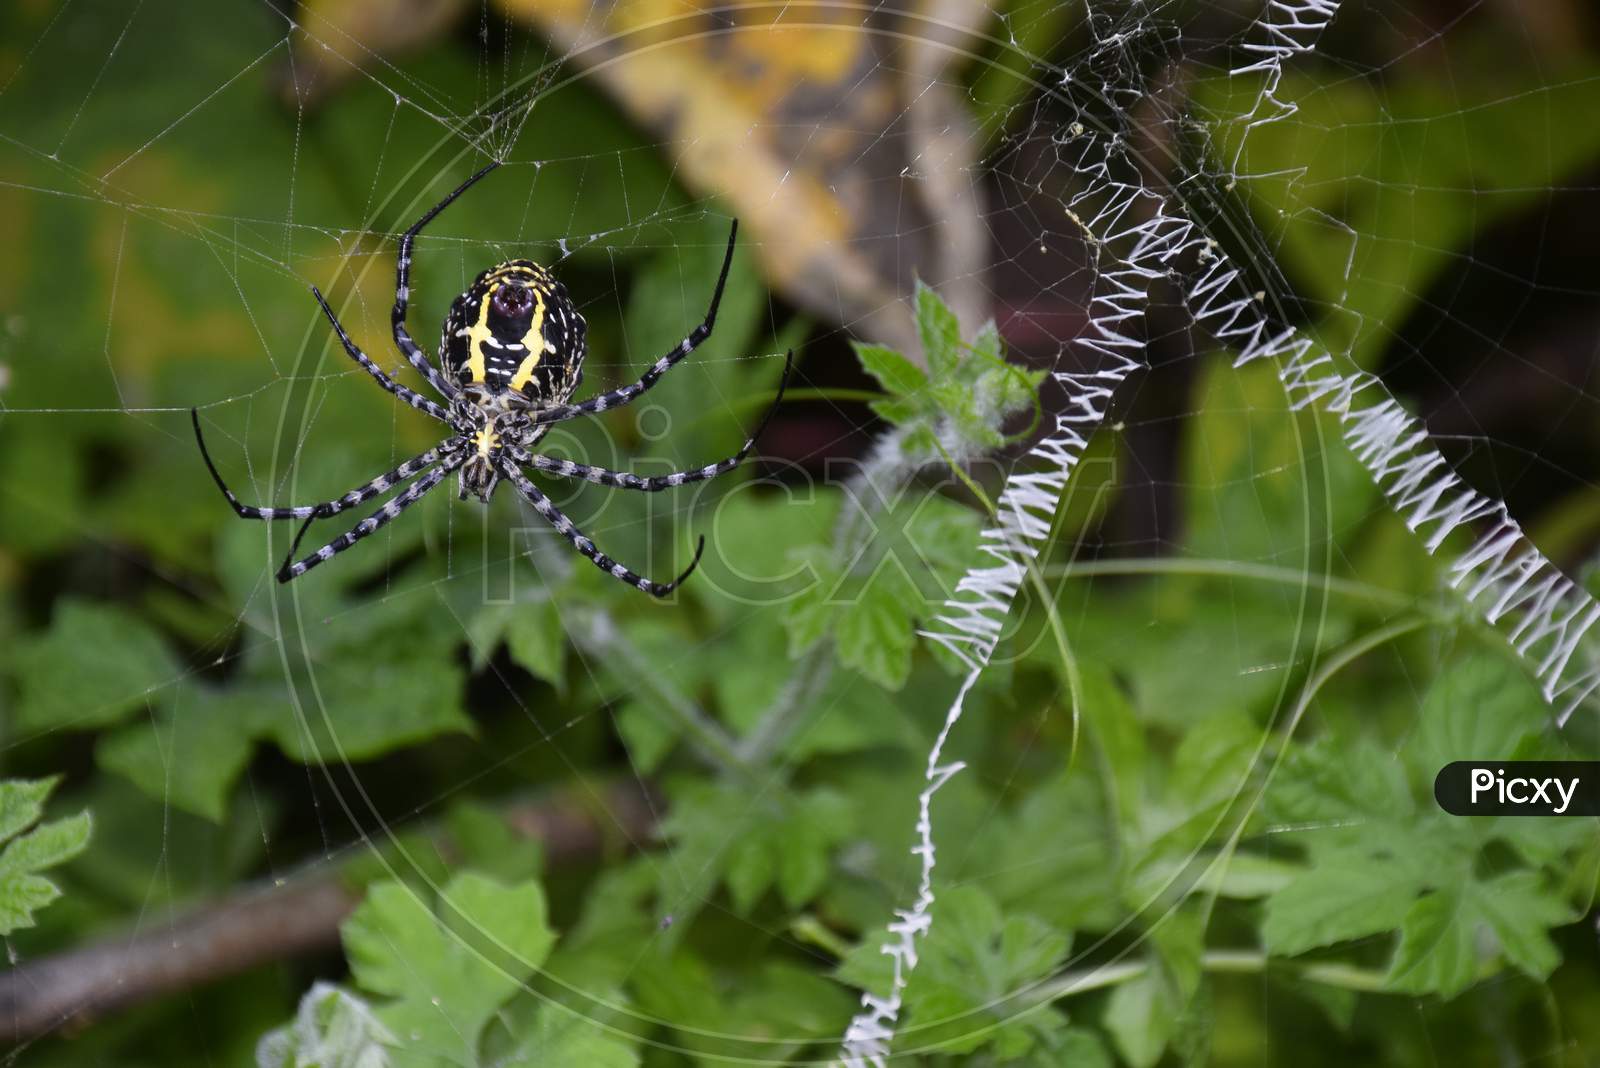 The Spider Weaves Its Net Among The Green Plants